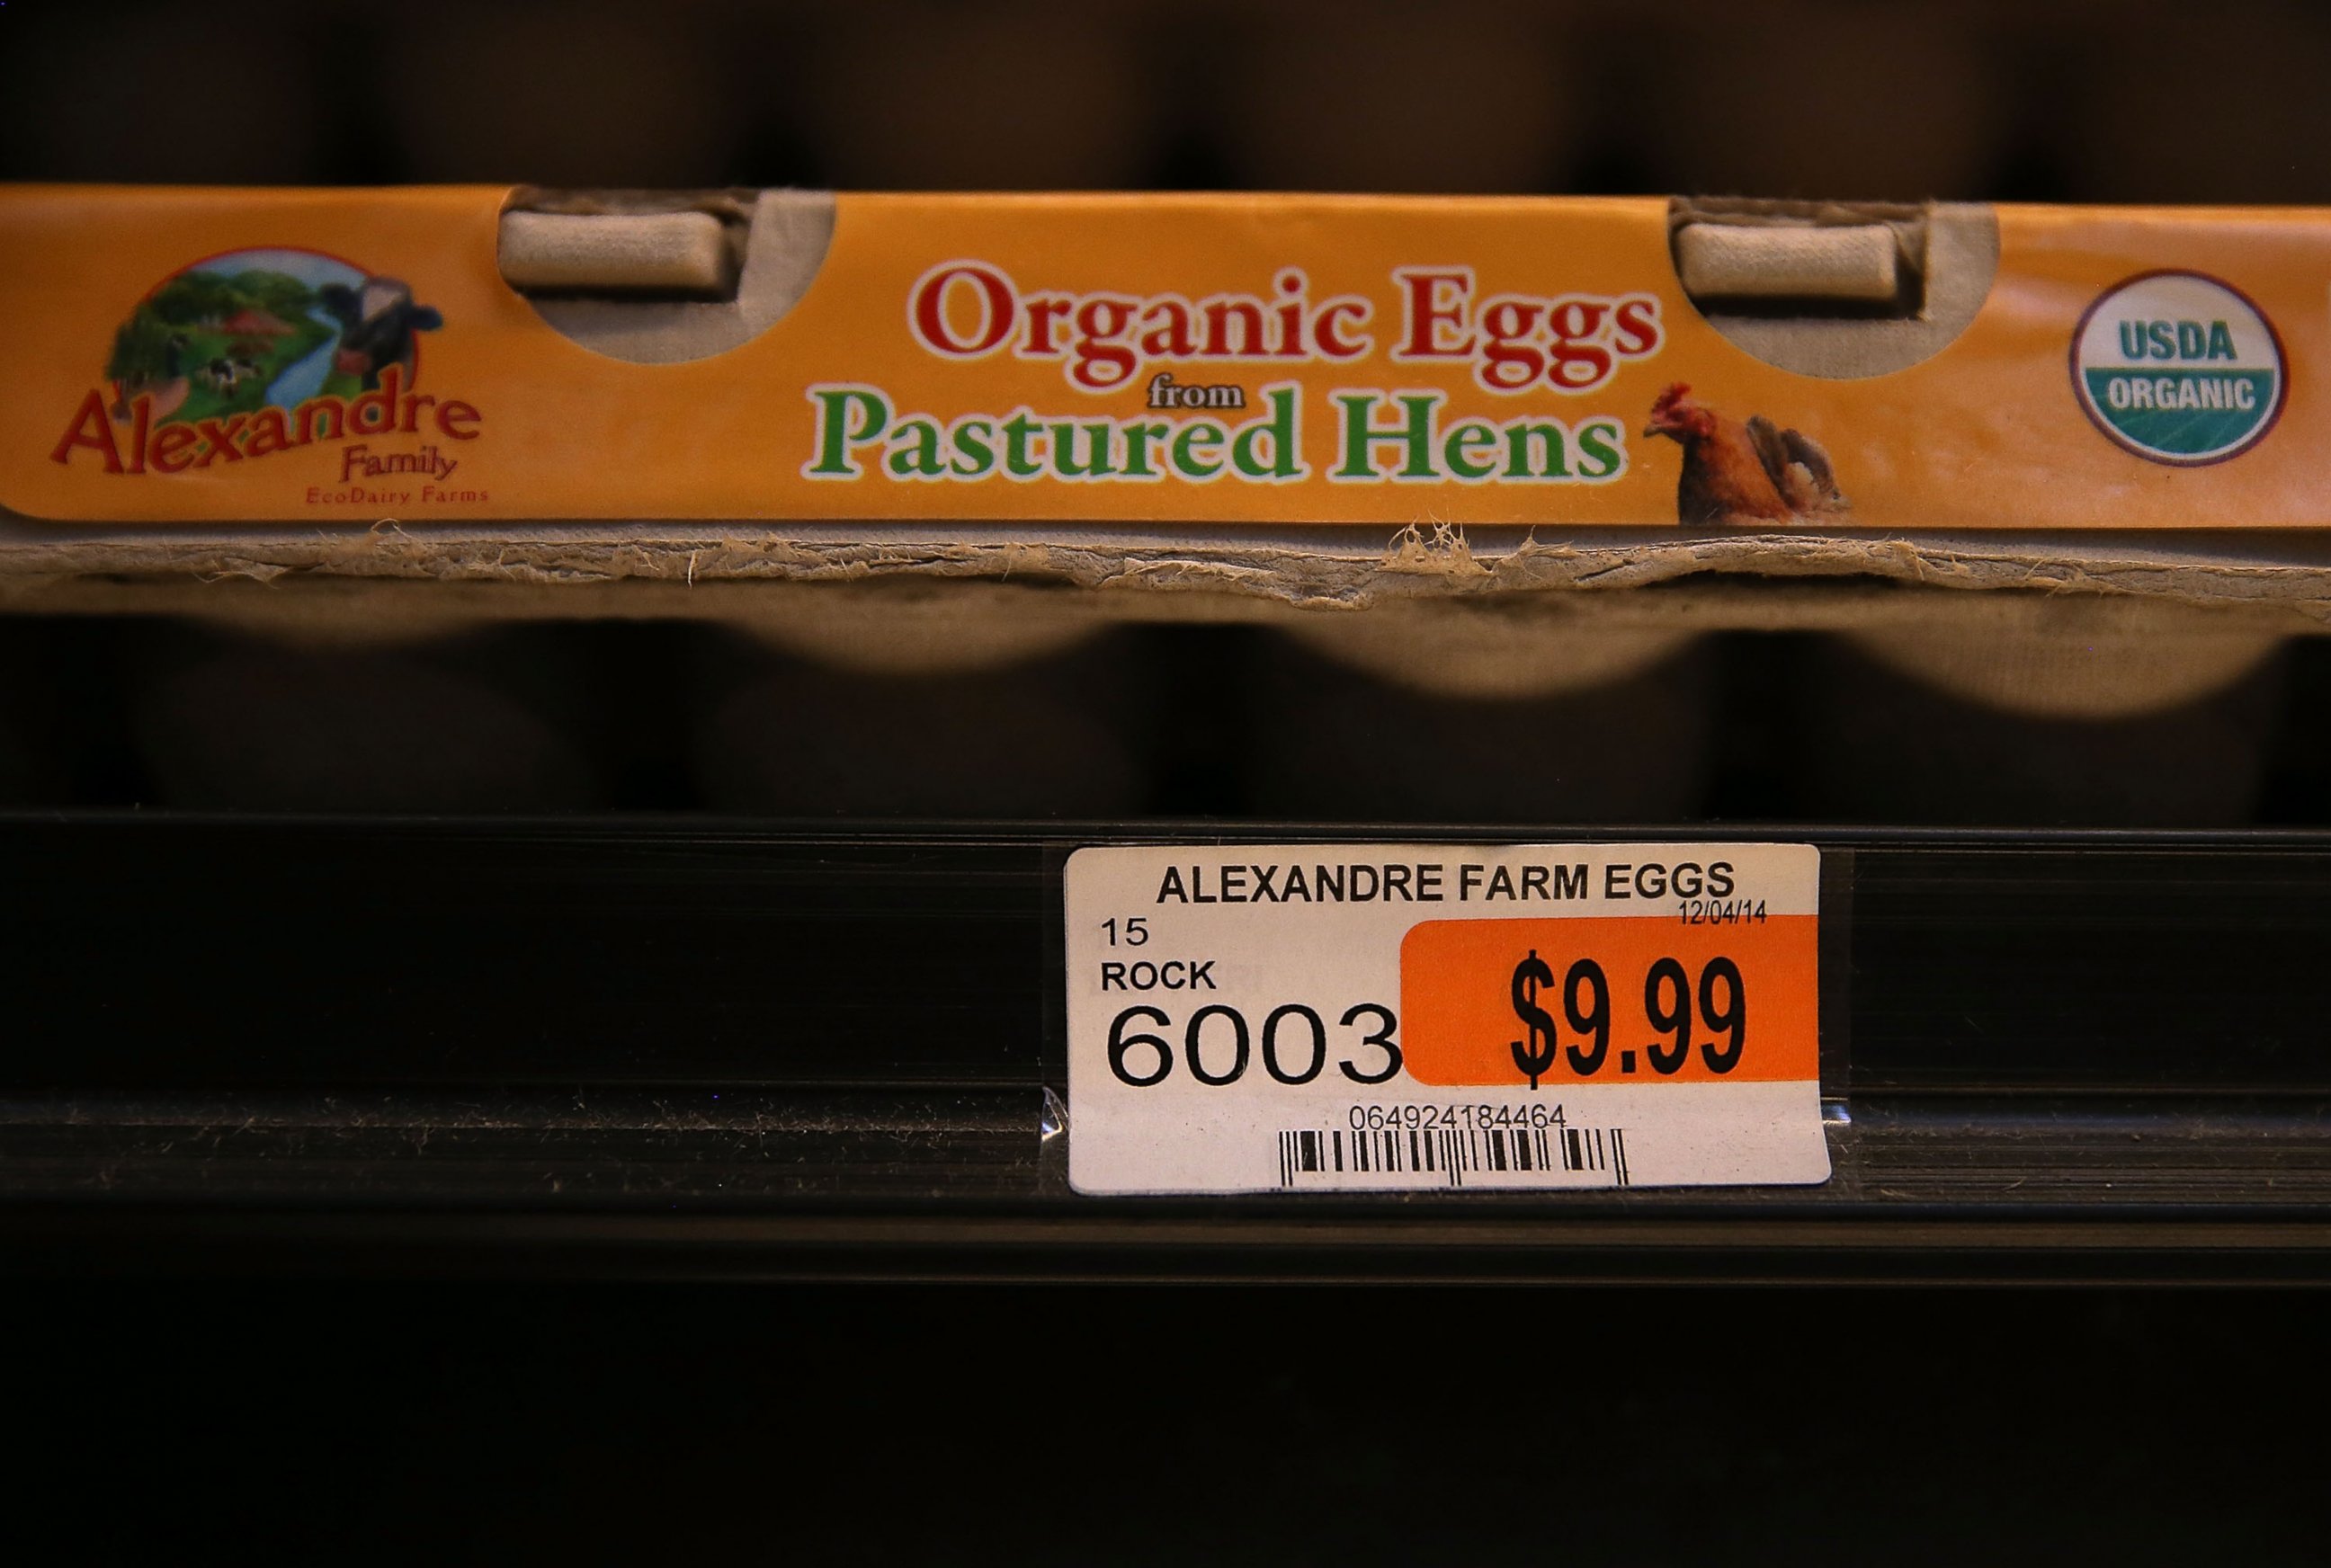 PHOTO: Cartons of eggs are displayed on a shelf at the Marina Supermarket on July 17, 2015 in San Francisco.